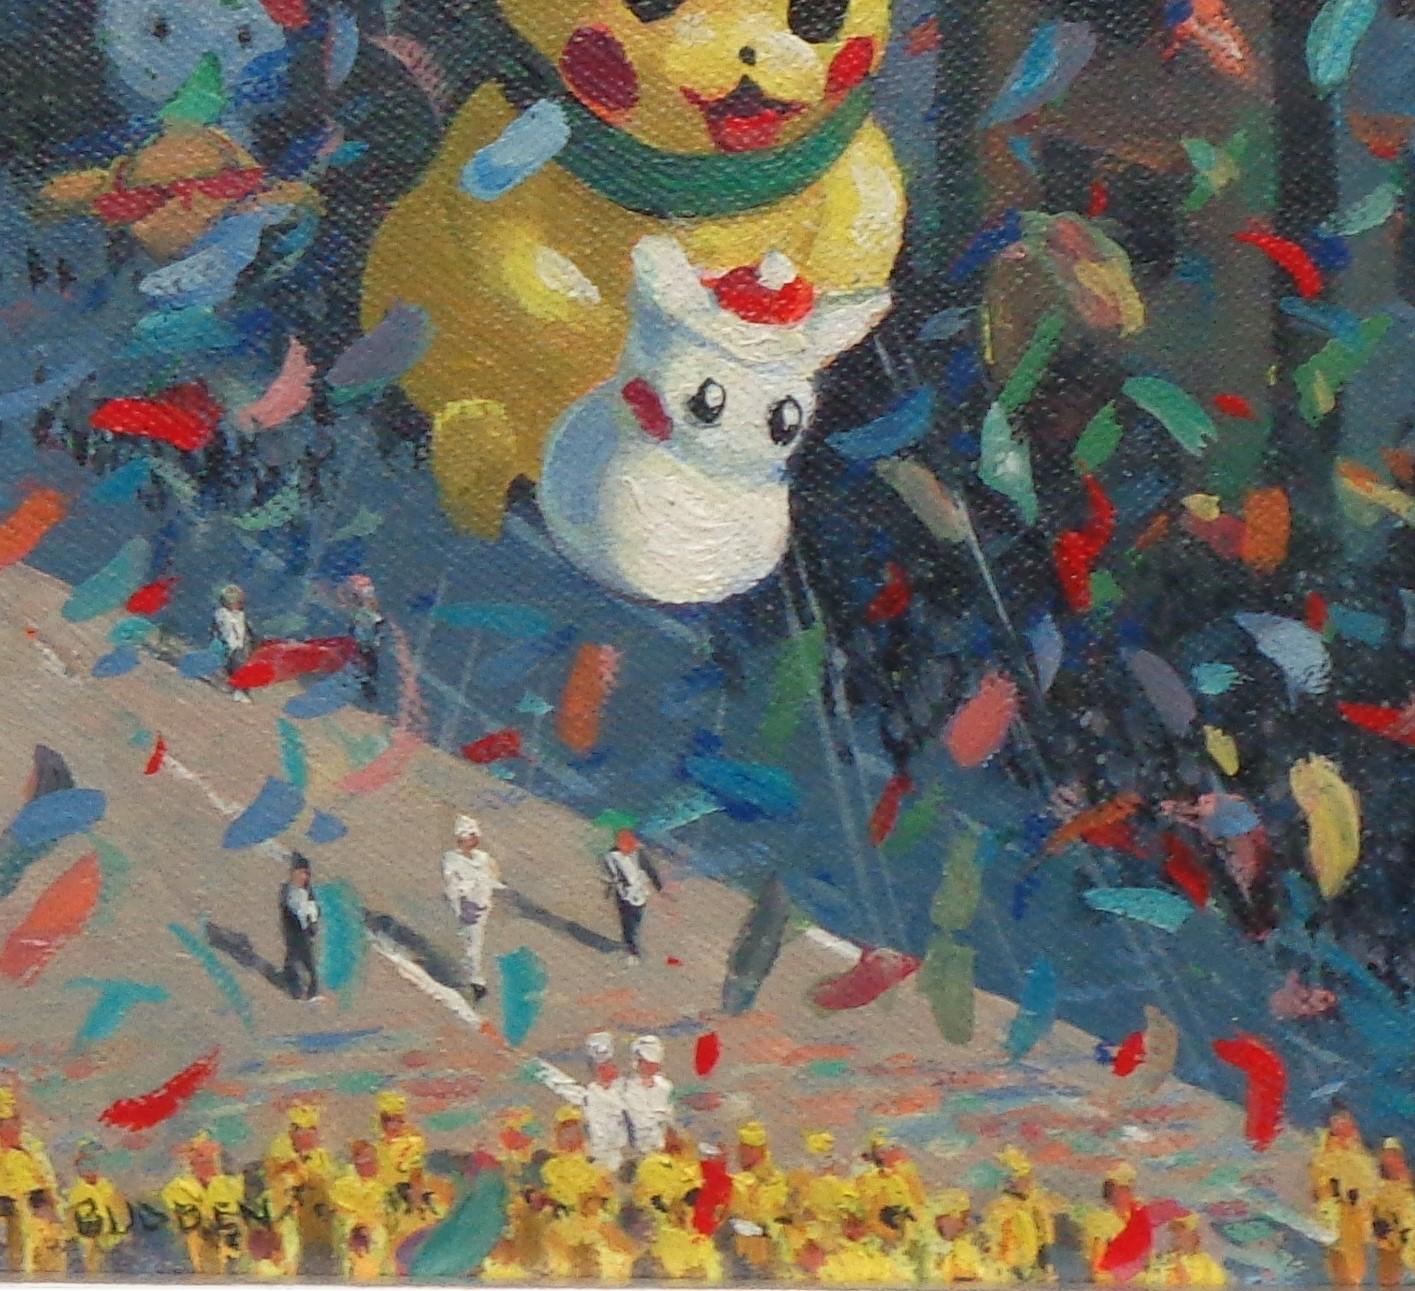   NYC Landscape Oil Painting Michael Budden Macy's Parade Series Pikachu For Sale 2